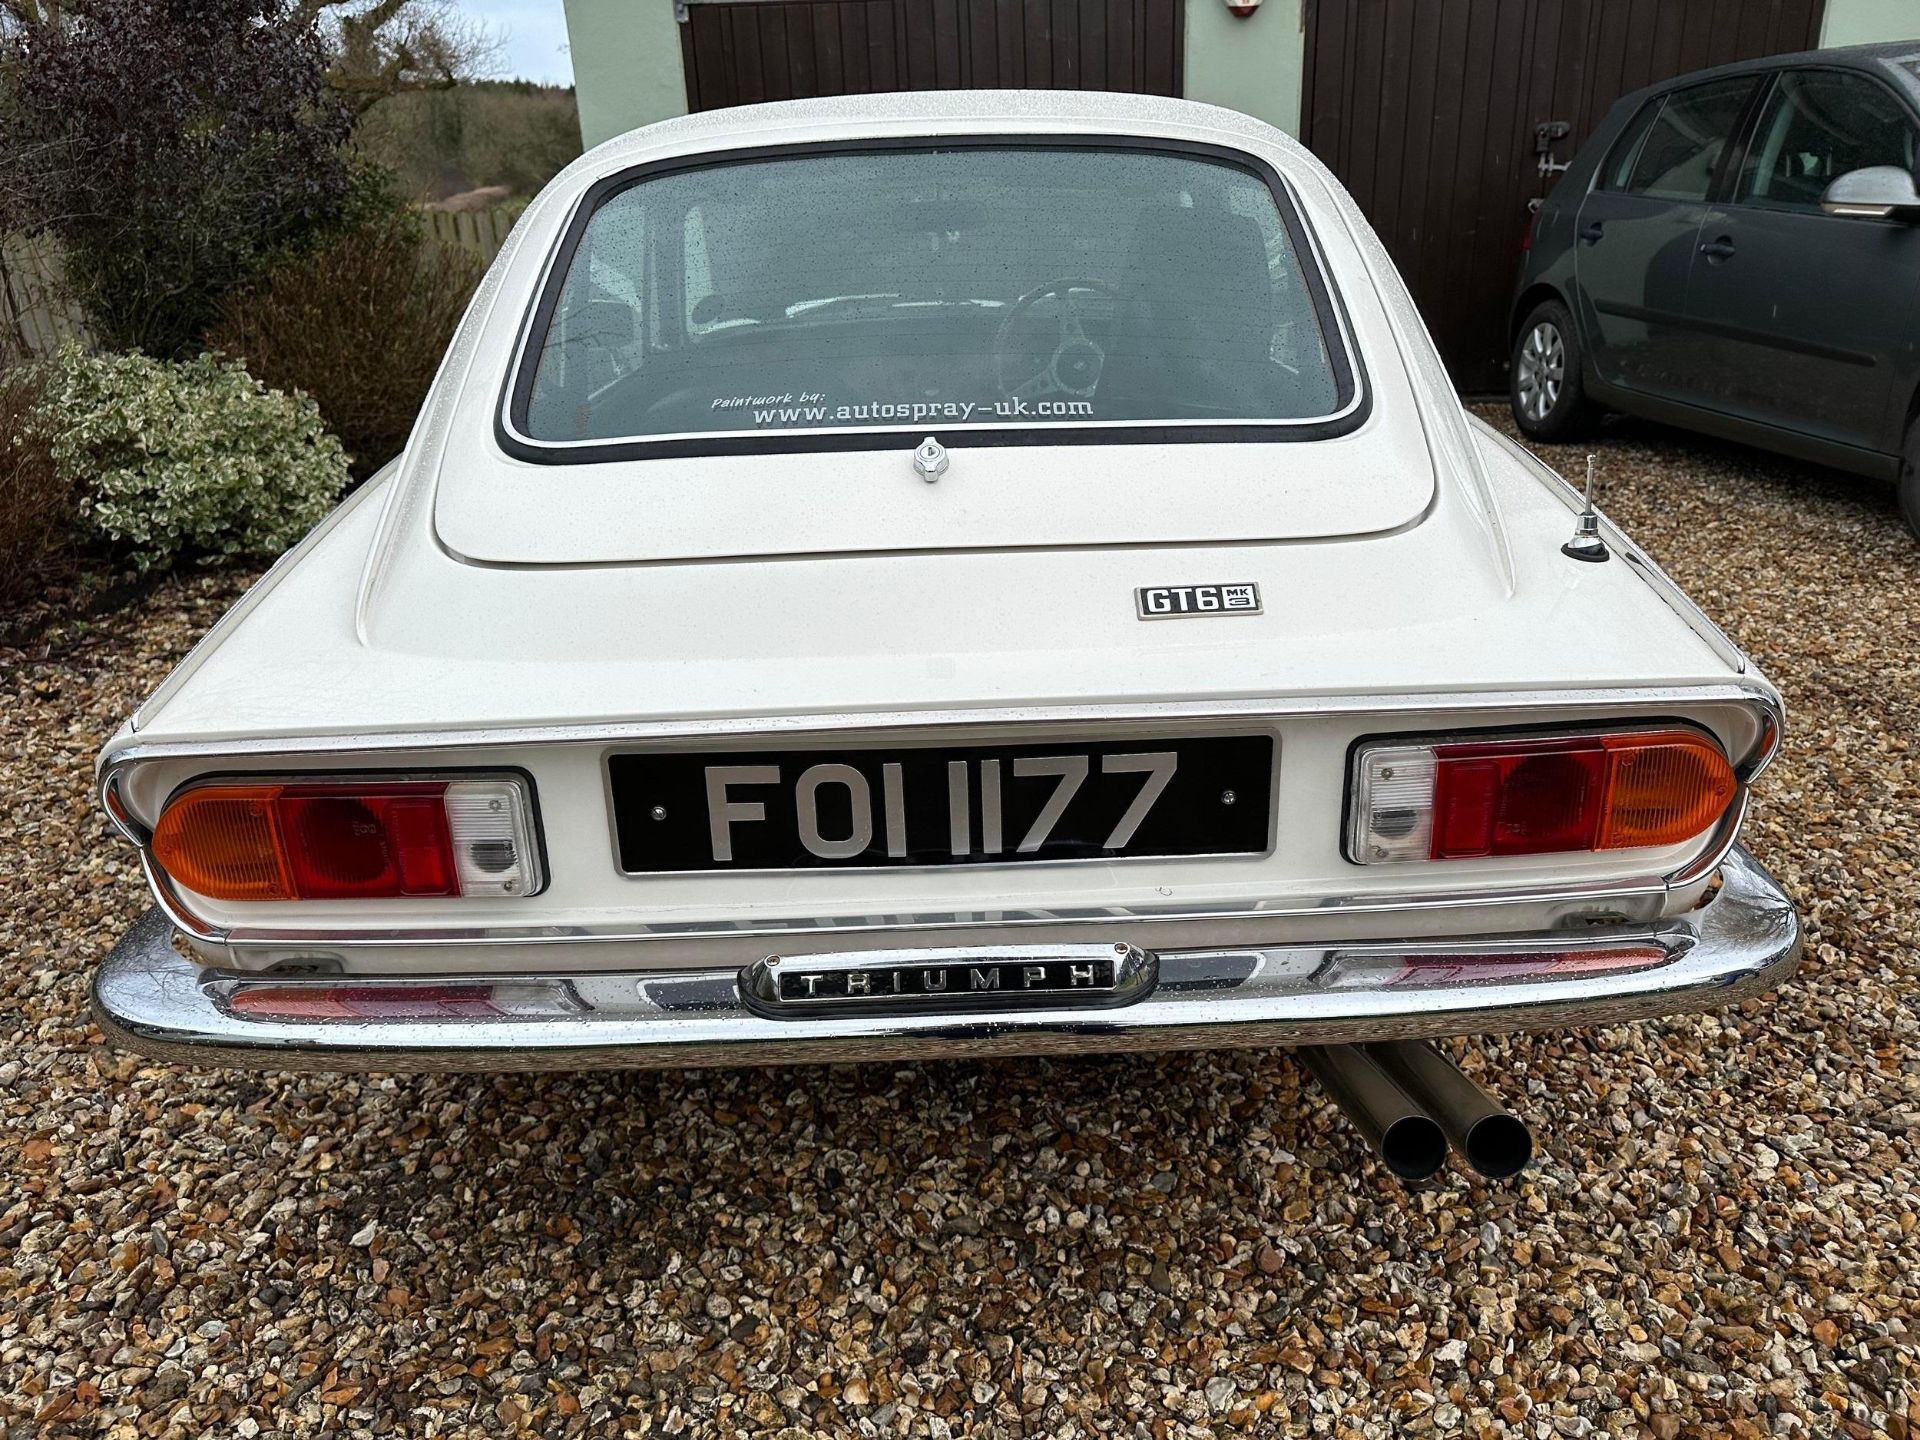 1973 Triumph GT6 Registration number FOI 1177 Chassis number KE145270 Engine number 24517 White with - Image 28 of 34